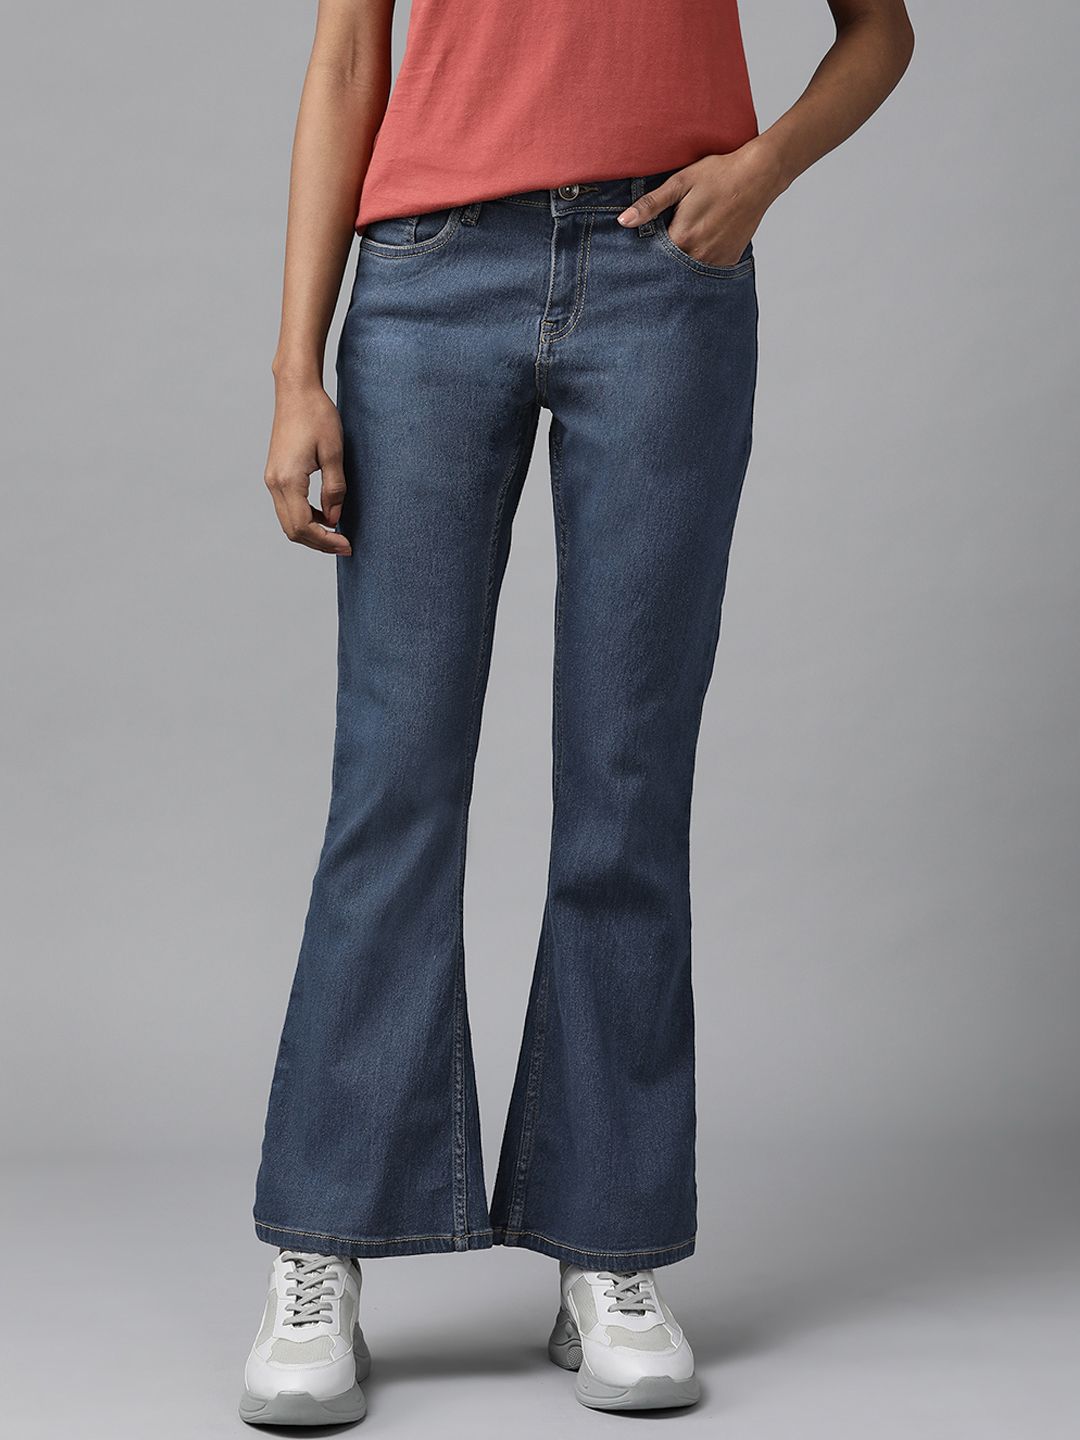 The Roadster Lifestyle Co Women Blue Flared Light Fade Stretchable Jeans Price in India